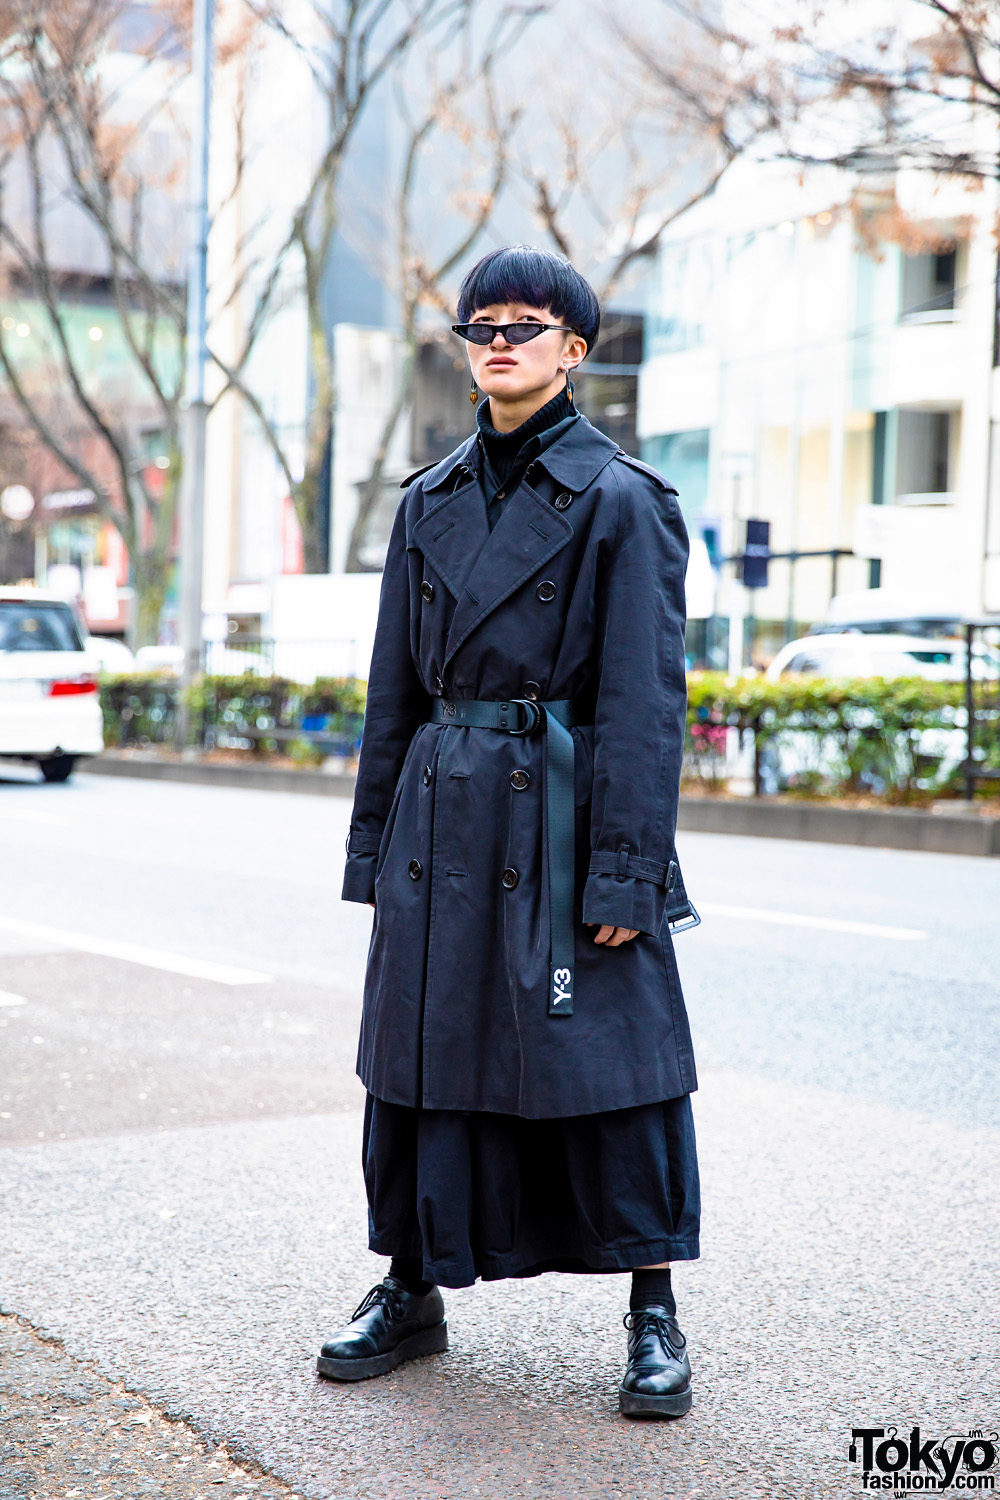 All Black Men's Winter Street Style w/ Burberry Trench Coat, Y-3, Wide Pants, Shoes & Pointy Glasses – Tokyo Fashion